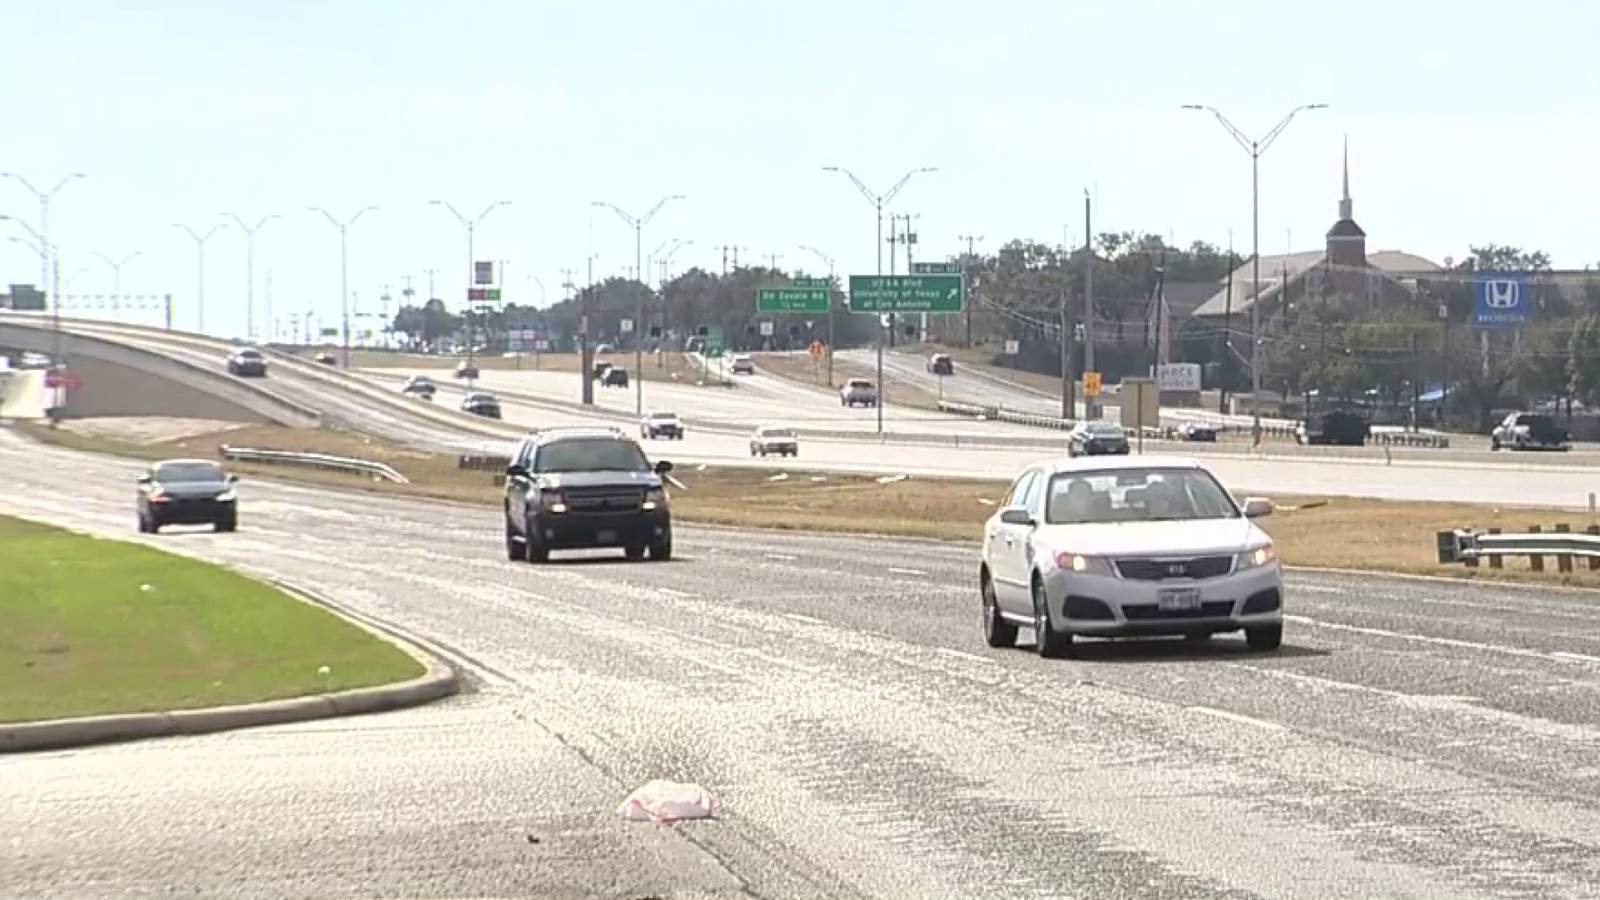 SAQ: Merging onto highway can be source of frustration for San Antonio drivers